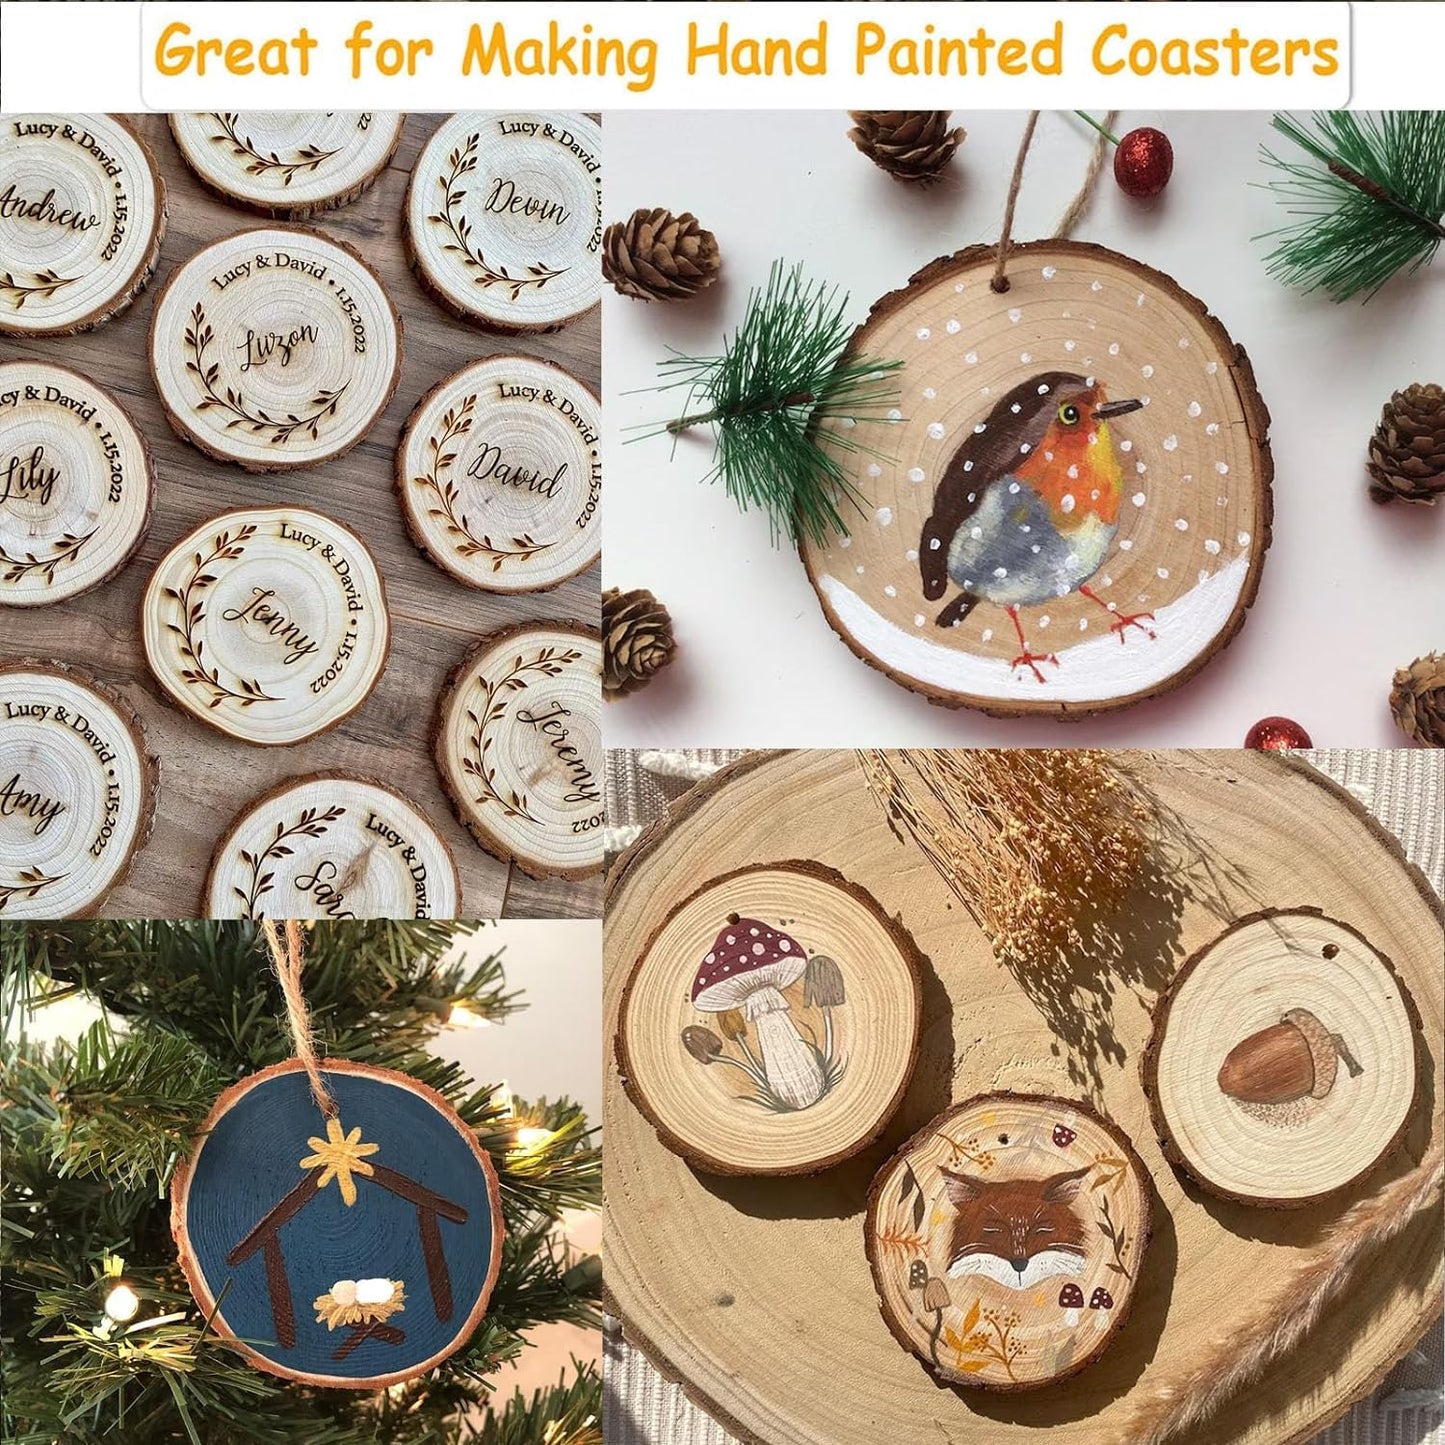 Natural Wood Slices - 30 Pcs 3.5-4 inches Craft Unfinished Wood kit Predrilled with Hole Wooden Circles for Arts Wood Slices Christmas Ornaments DIY